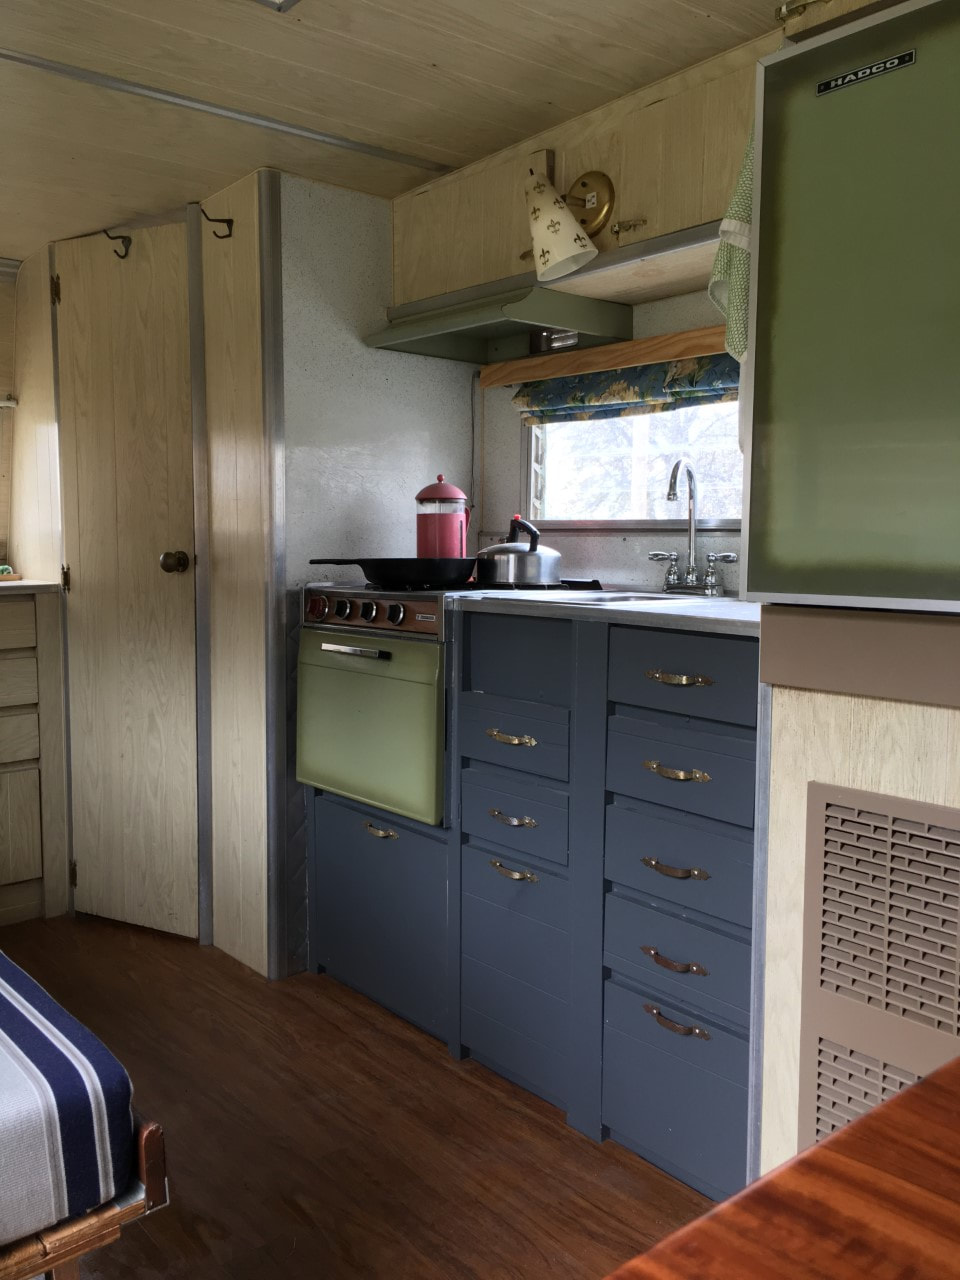 View of a kitchen inside of a vintage travel trailer. 